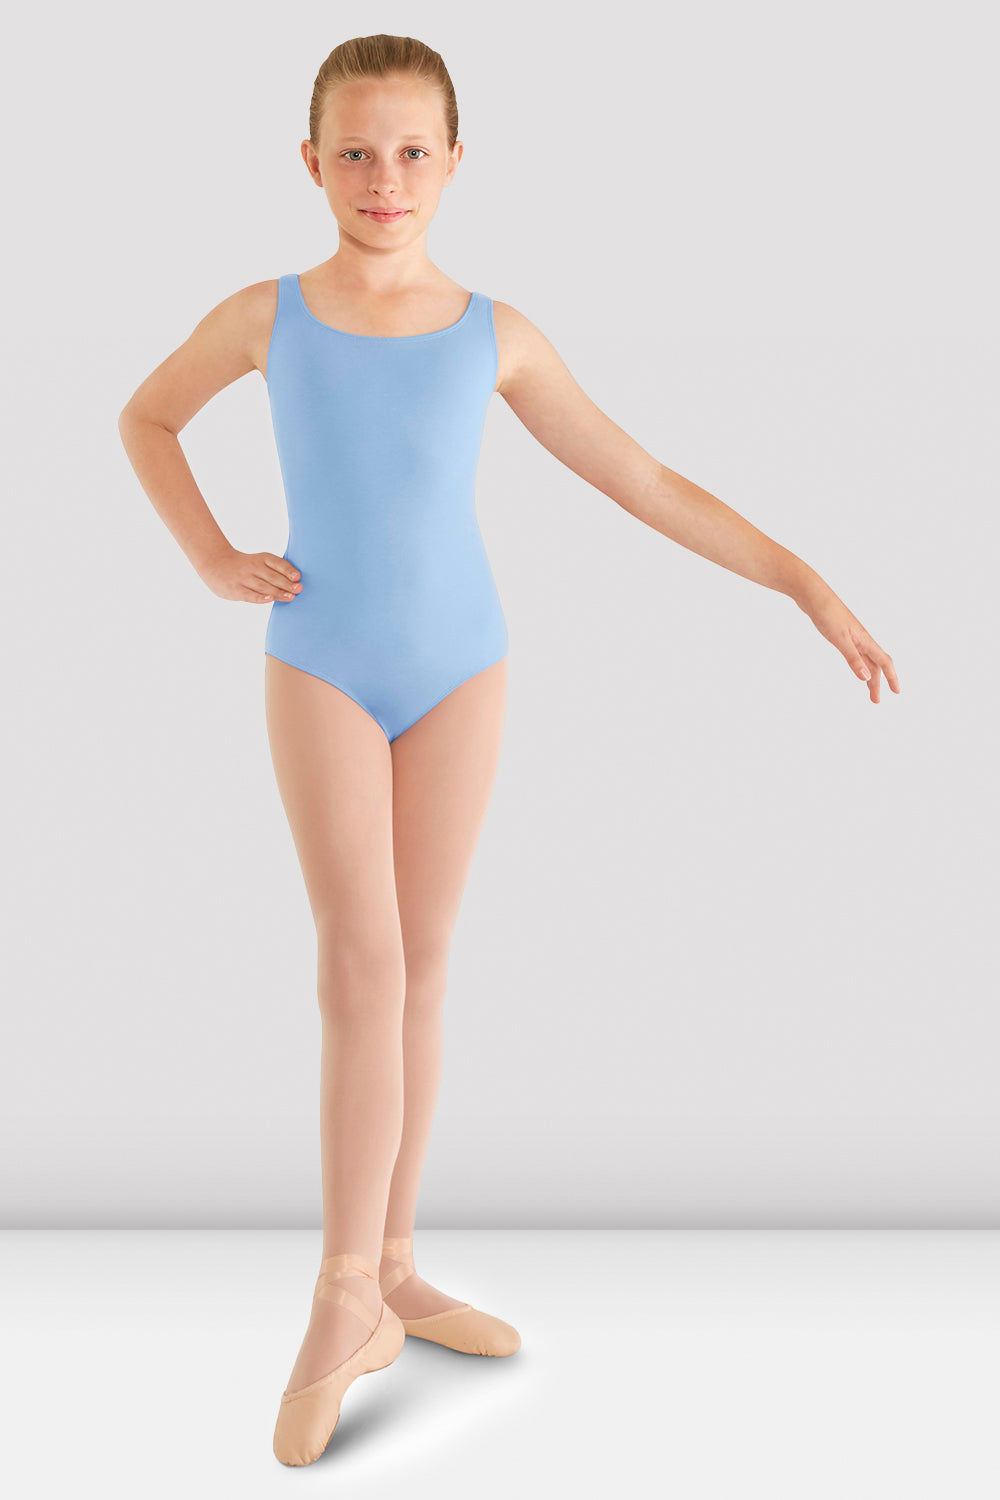 A young ballet dancer pointing her toes wearing the Girls Tank Leotard with support cups in blue